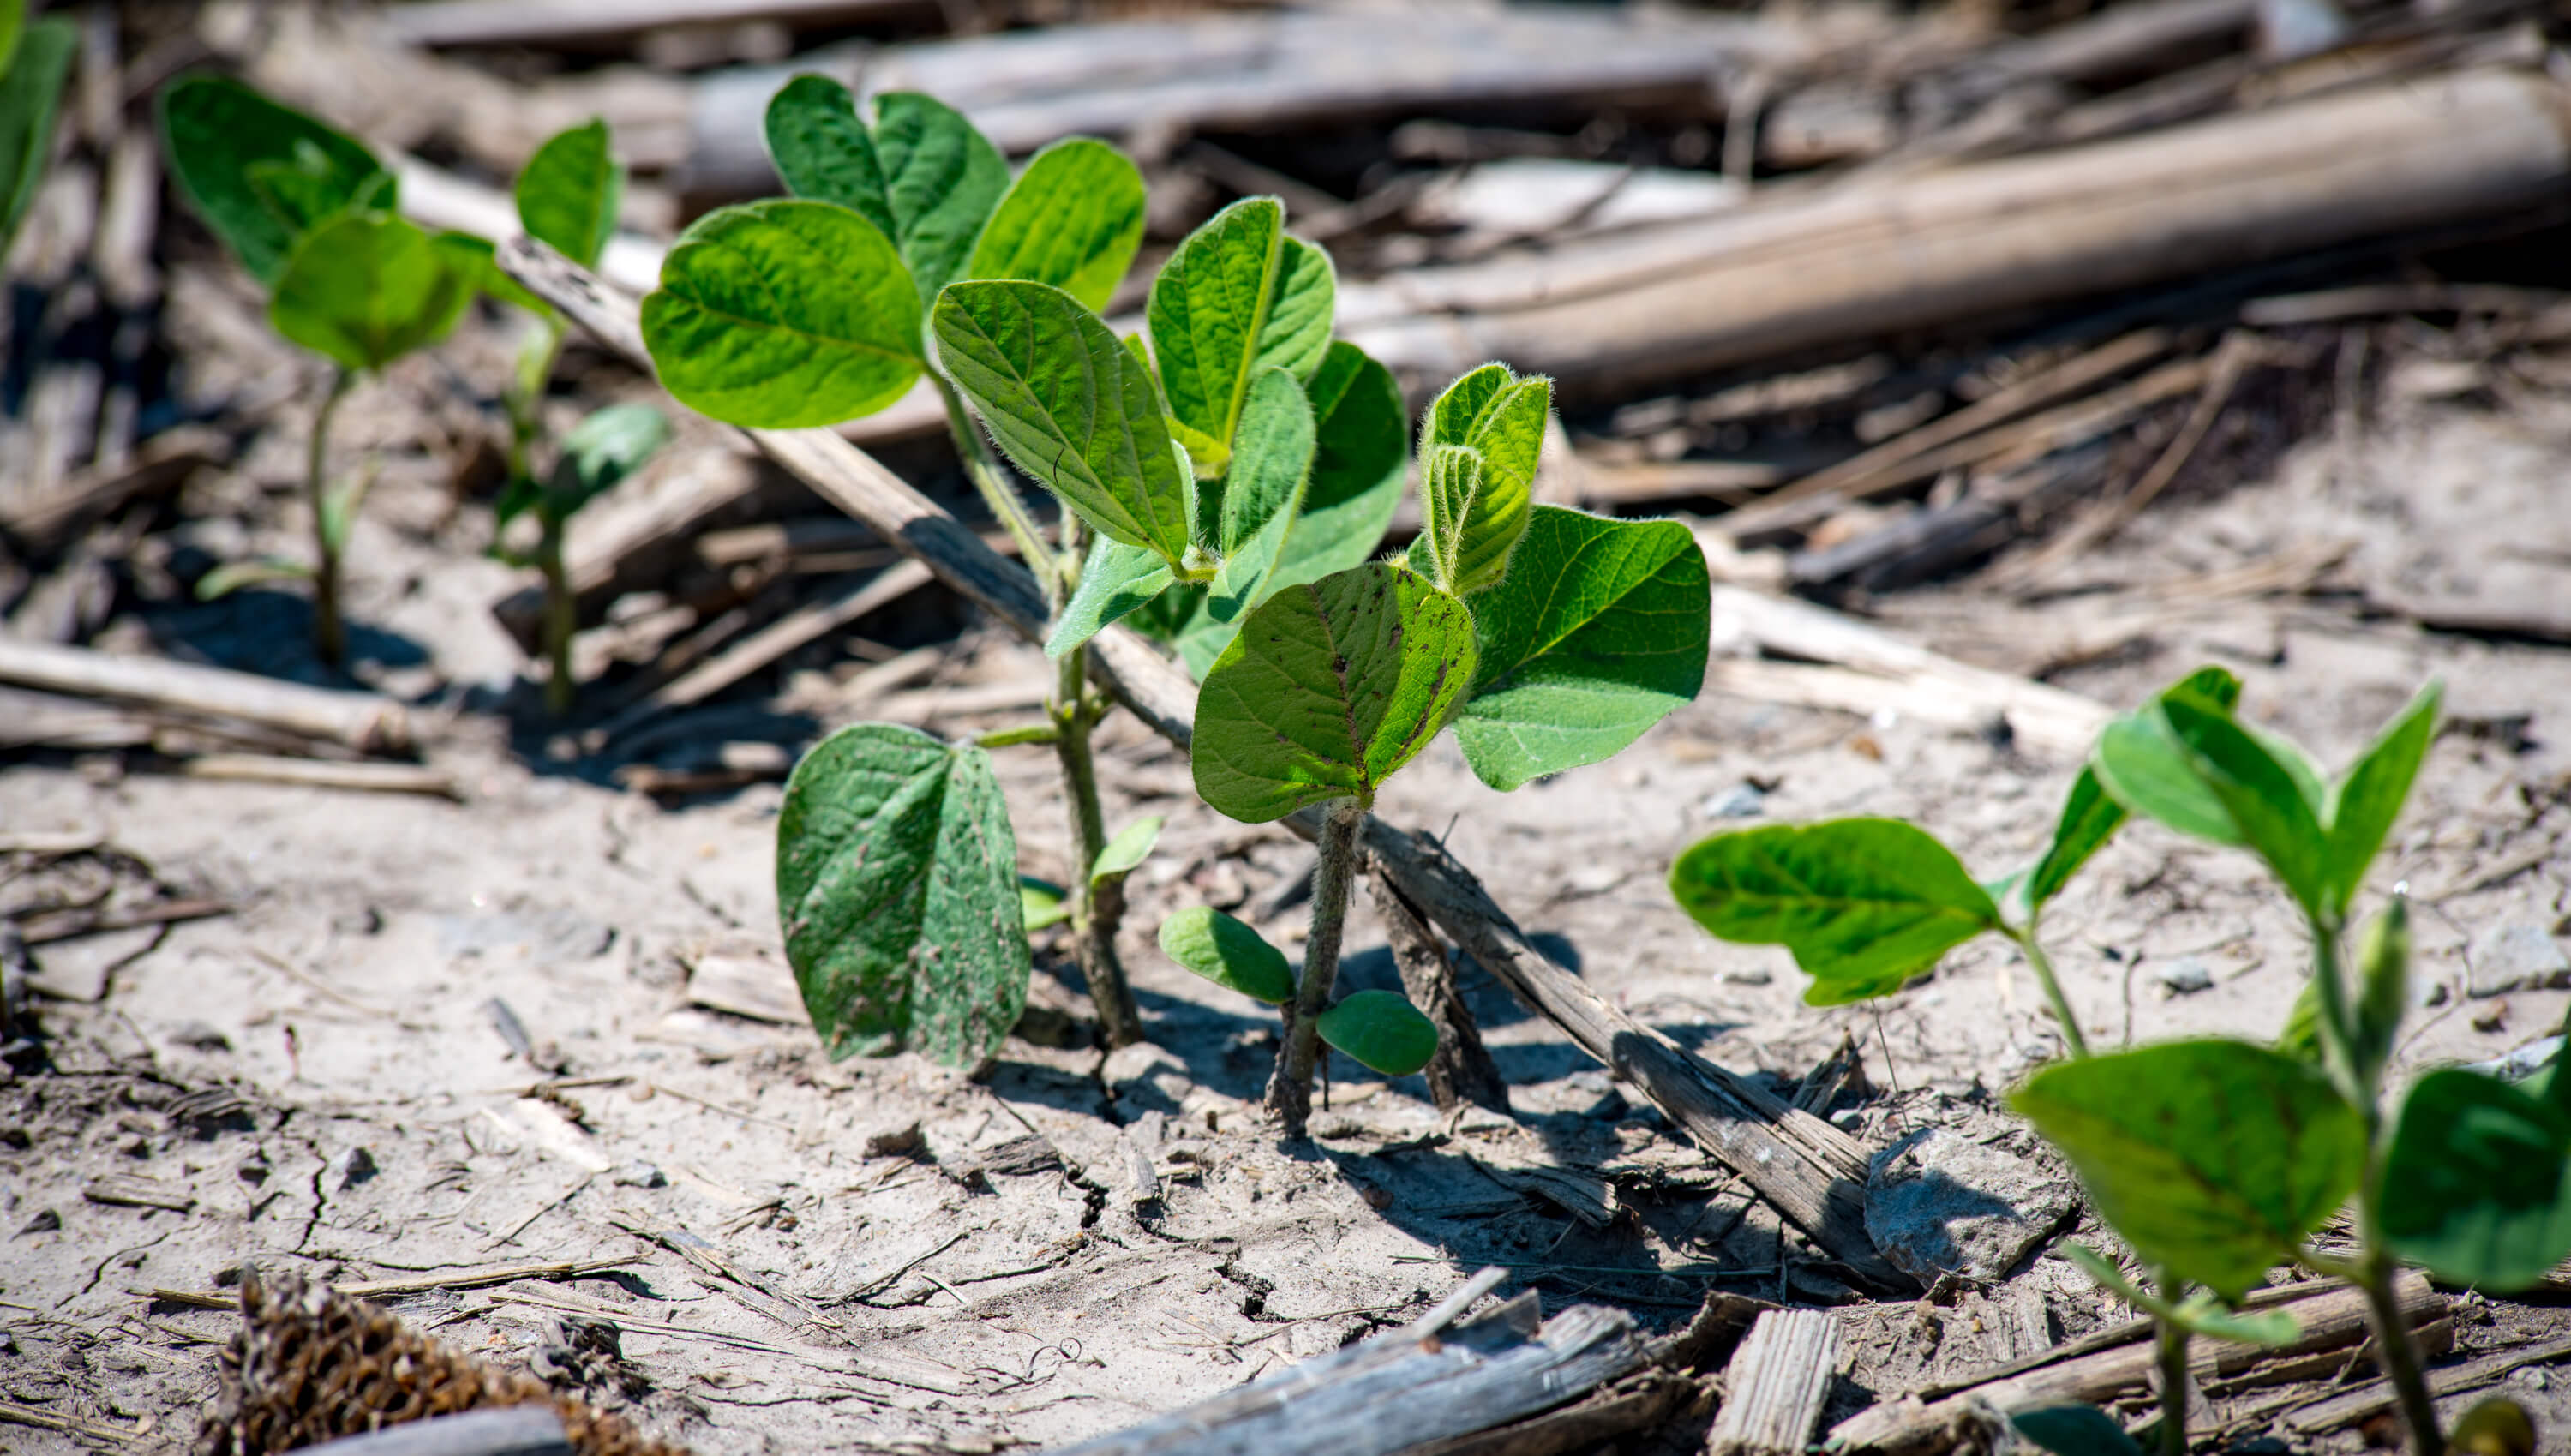 A close-up of budding soybean plants among residue from